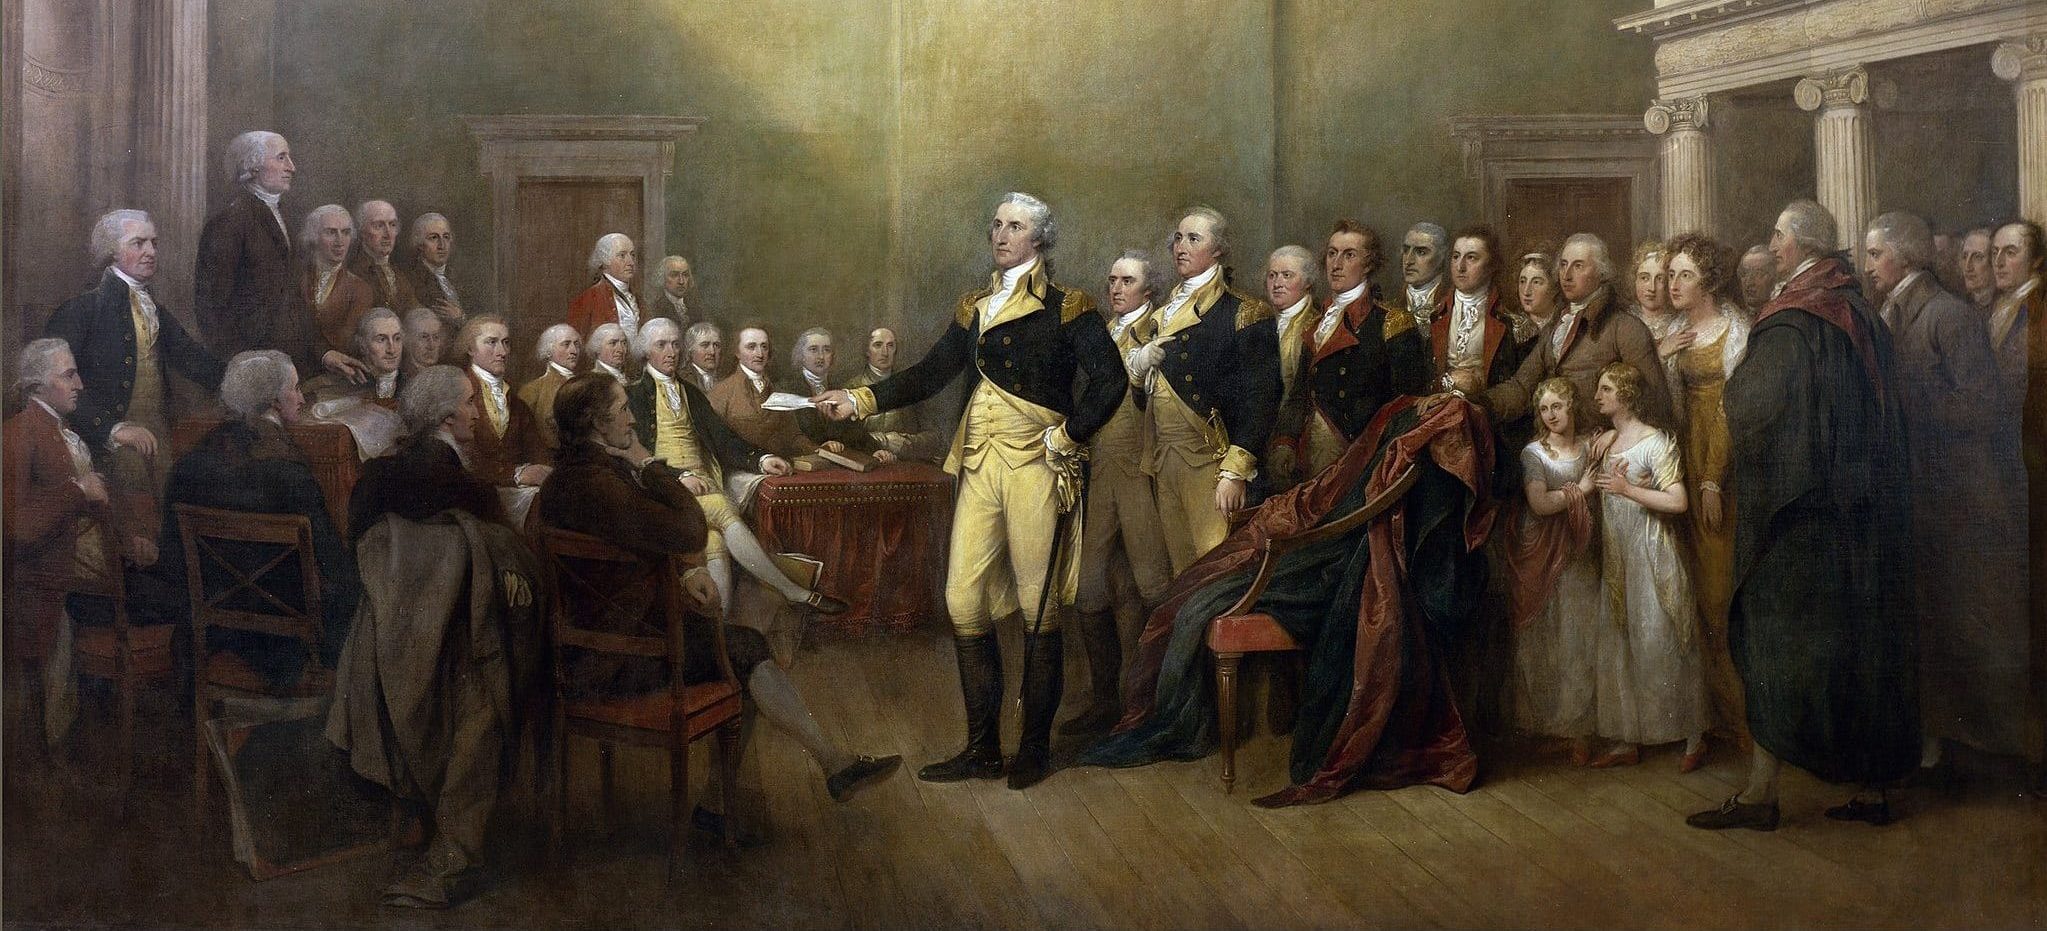 History is Filled With Authoritarian Takeovers; America’s Founders Hoped to Prevent Them